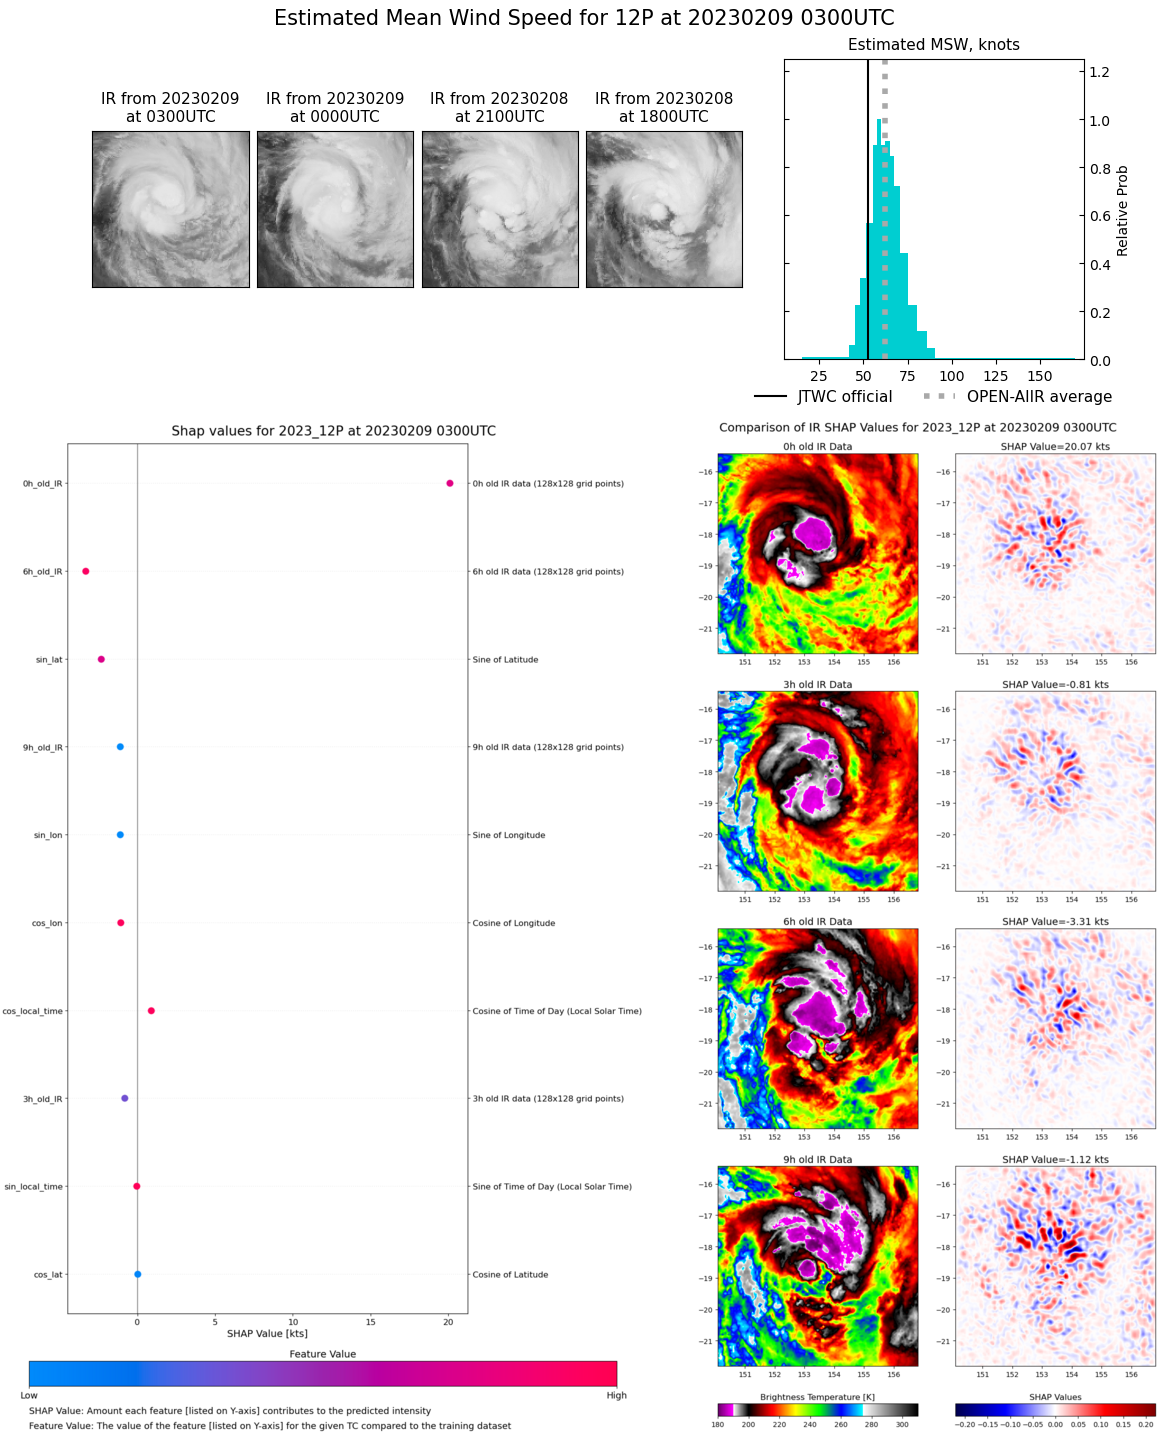 SATELLITE ANALYSIS, INITIAL POSITION AND INTENSITY DISCUSSION: ANIMATED MULTISPECTRAL SATELLITE IMAGERY (MSI) AND THE ENHANCED INFRARED IMAGERY (EIR) DEPICT DEEP CENTRAL CONVECTION WITH FORMATIVE BANDING WRAPPING AROUND AN OBSCURED LOW-LEVEL CIRCULATION CENTER (LLCC). THE INITIAL POSITION IS ASSESSED WITH HIGH CONFIDENCE USING EXTRAPOLATION OF A BULLSEYE PASS FROM A 082244Z METOP-B ASCAT IMAGE. THE INITIAL INTENSITY IS SET WITH HIGH CONFIDENCE BASED UPON MULTIPLE AGENCY FIX ASSESSMENTS AND OBSERVATIONS FROM MARION REEF WITH SUSTAINED WINDS OF 44 KNOTS (10-MINUTE AVERAGE). THE ENVIRONMENTAL ANALYSIS INDICATES A FAVORABLE ENVIRONMENT WITH A ROBUST POLEWARD OUTFLOW AND MODERATE EQUATORWARD OUTFLOW, WARM SSTS, AND FAVORABLE (5-10 KNOTS) VERTICAL WIND SHEAR (VWS).